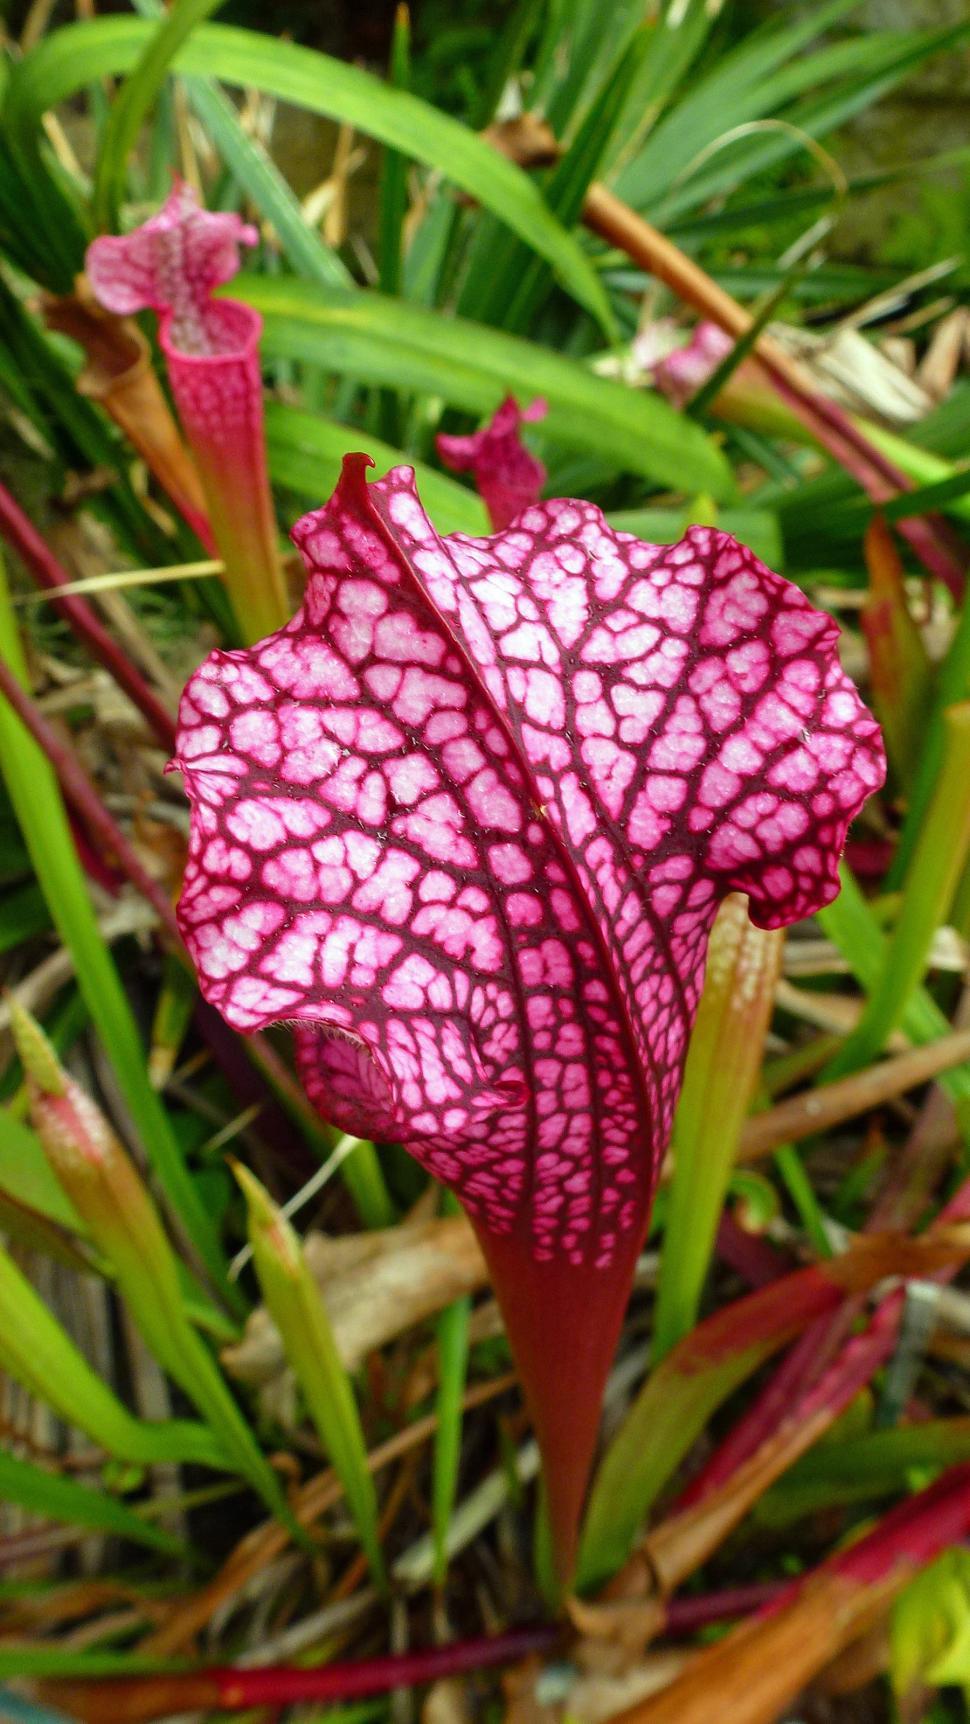 Free Image of Red Pitcher Plants 